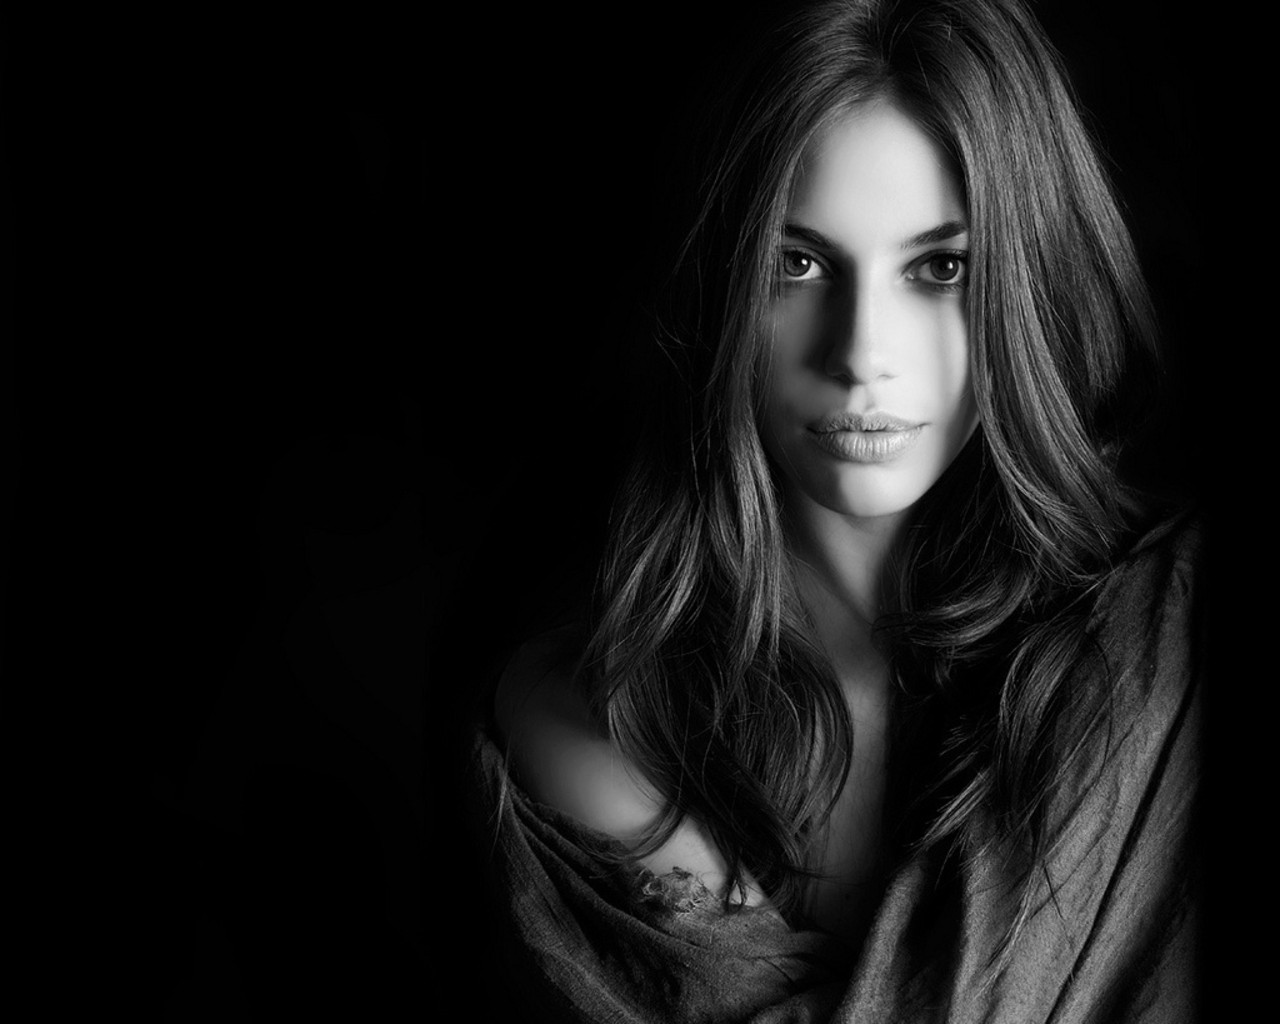 Photography Art Black And White Of Women - HD Wallpaper 